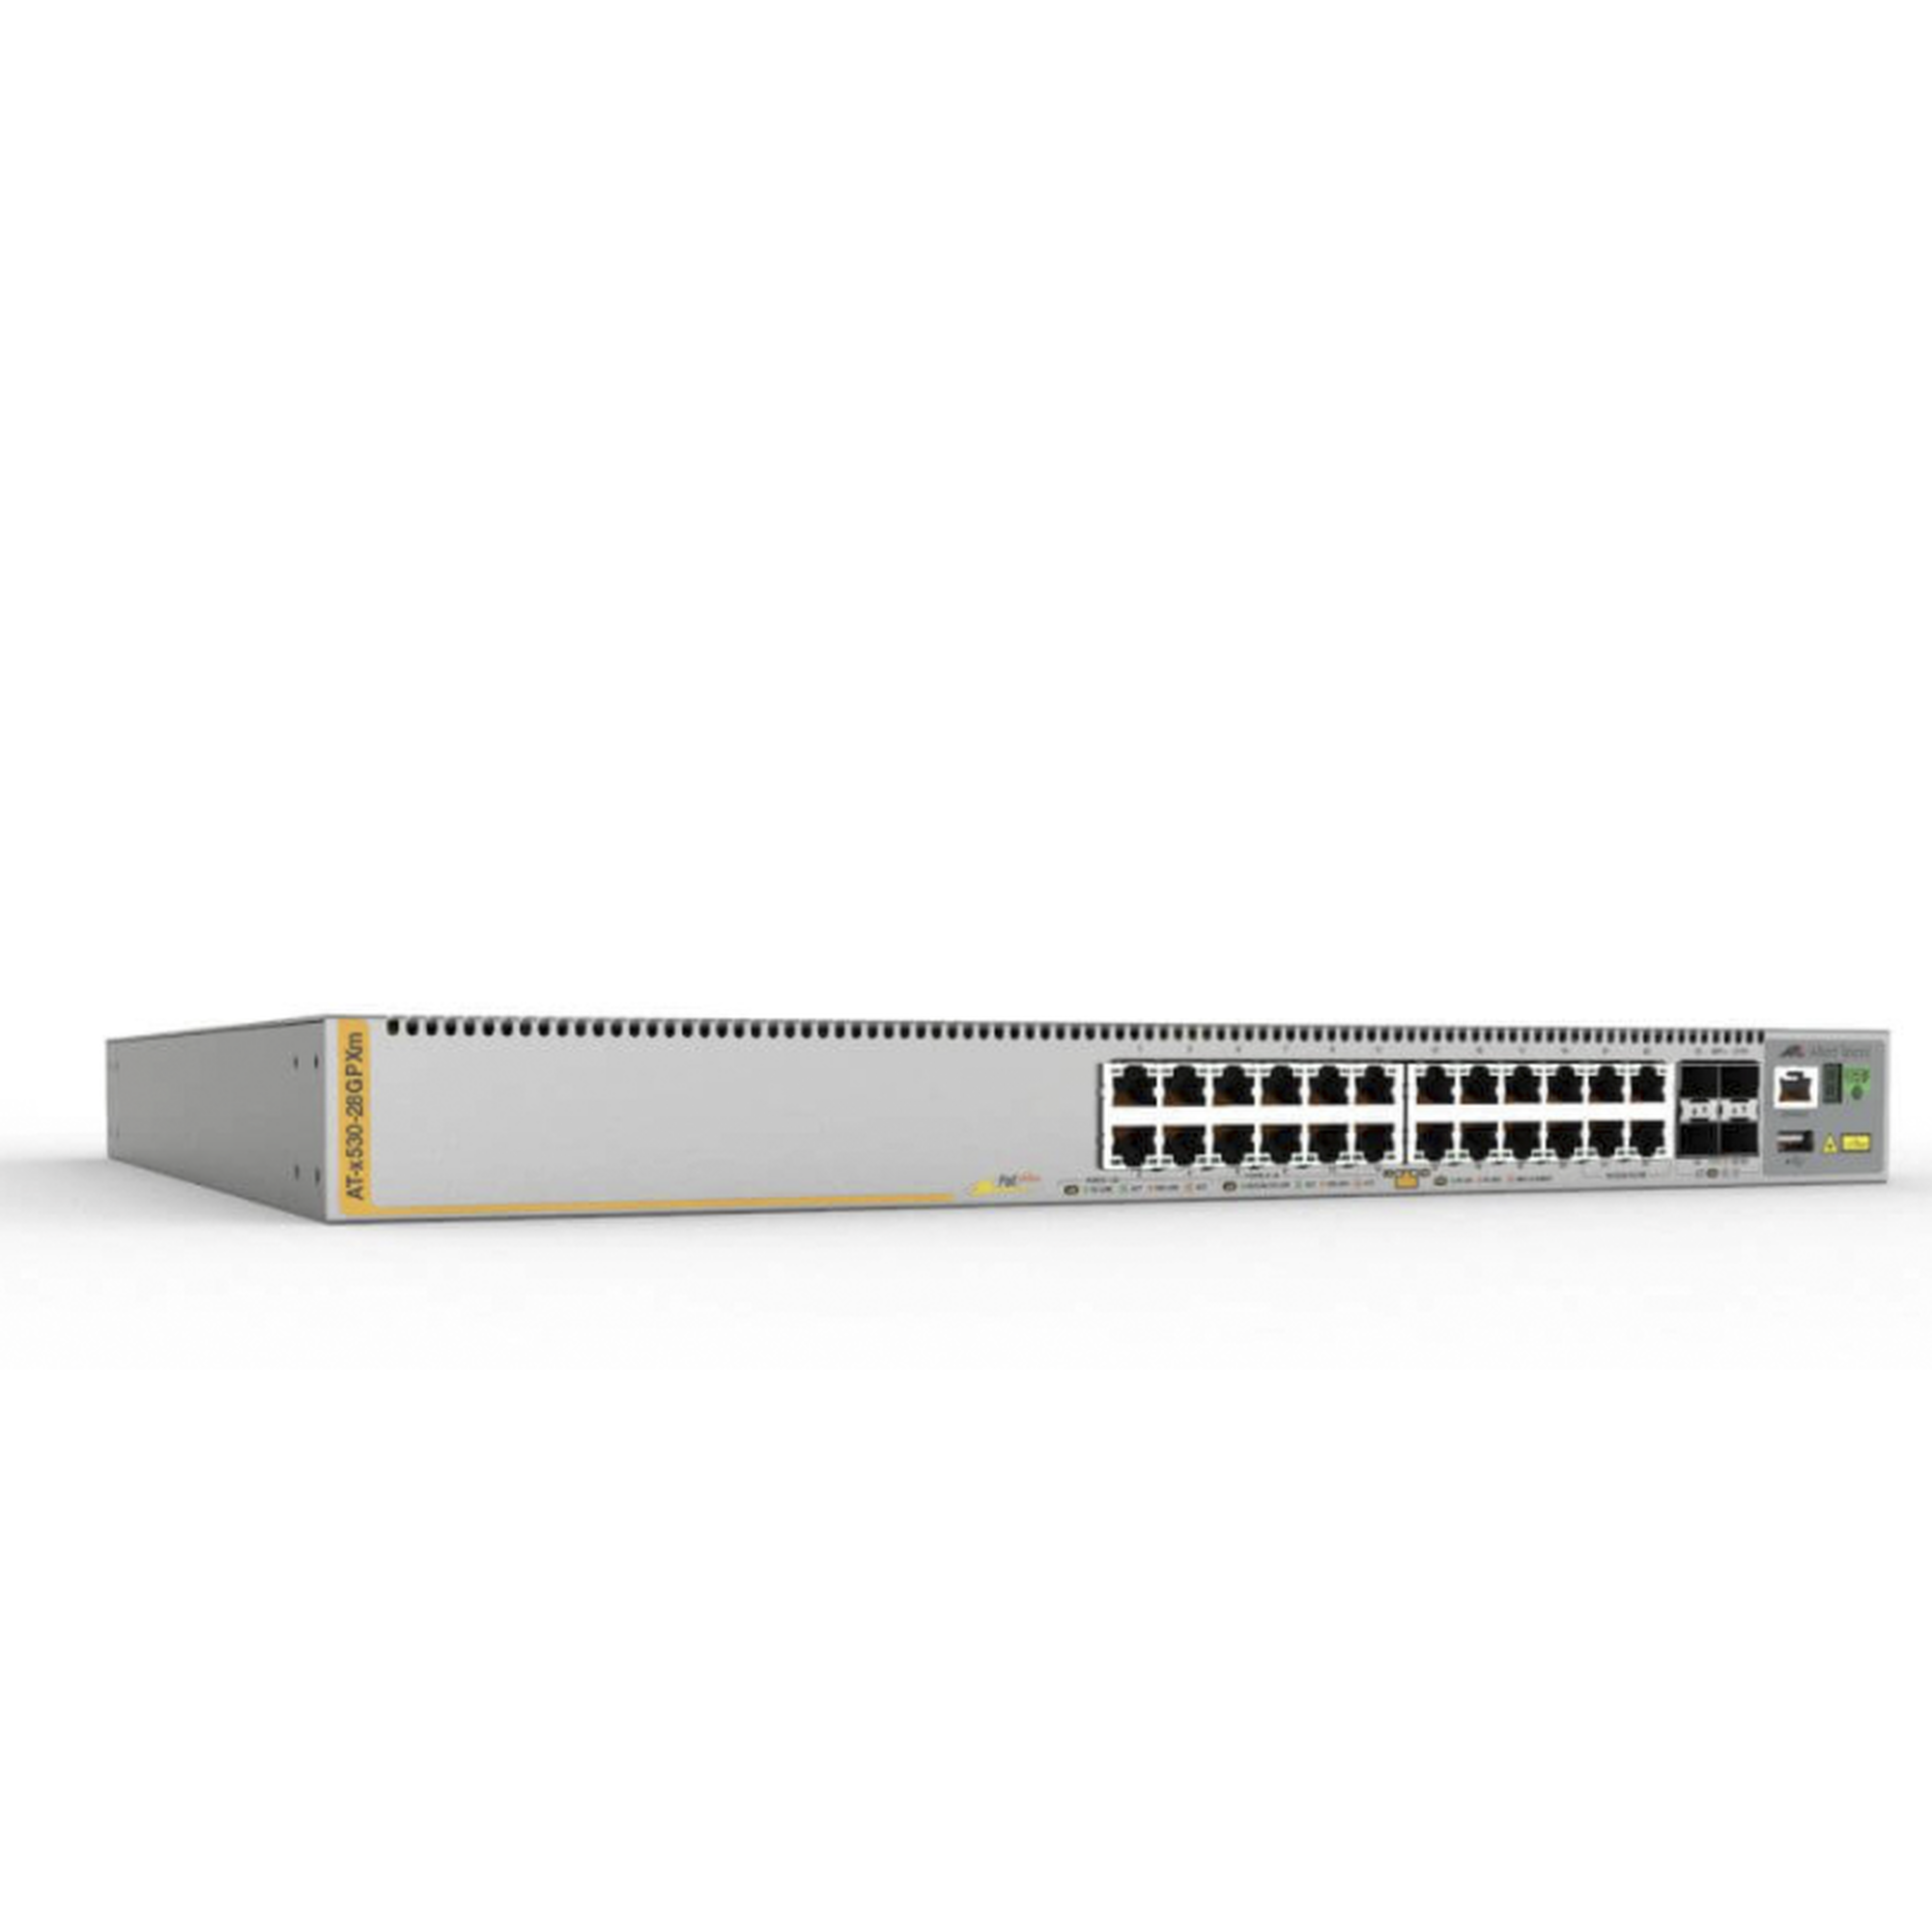 Switch PoE+ Stackeable Capa 3, 20 puertos 10/100/1000 Mbps + 4 x 100M/1G/2.5/5G-T + 4 puertos SFP+ 10 G, hasta 740 W, fuente redundante, NetCover Preference